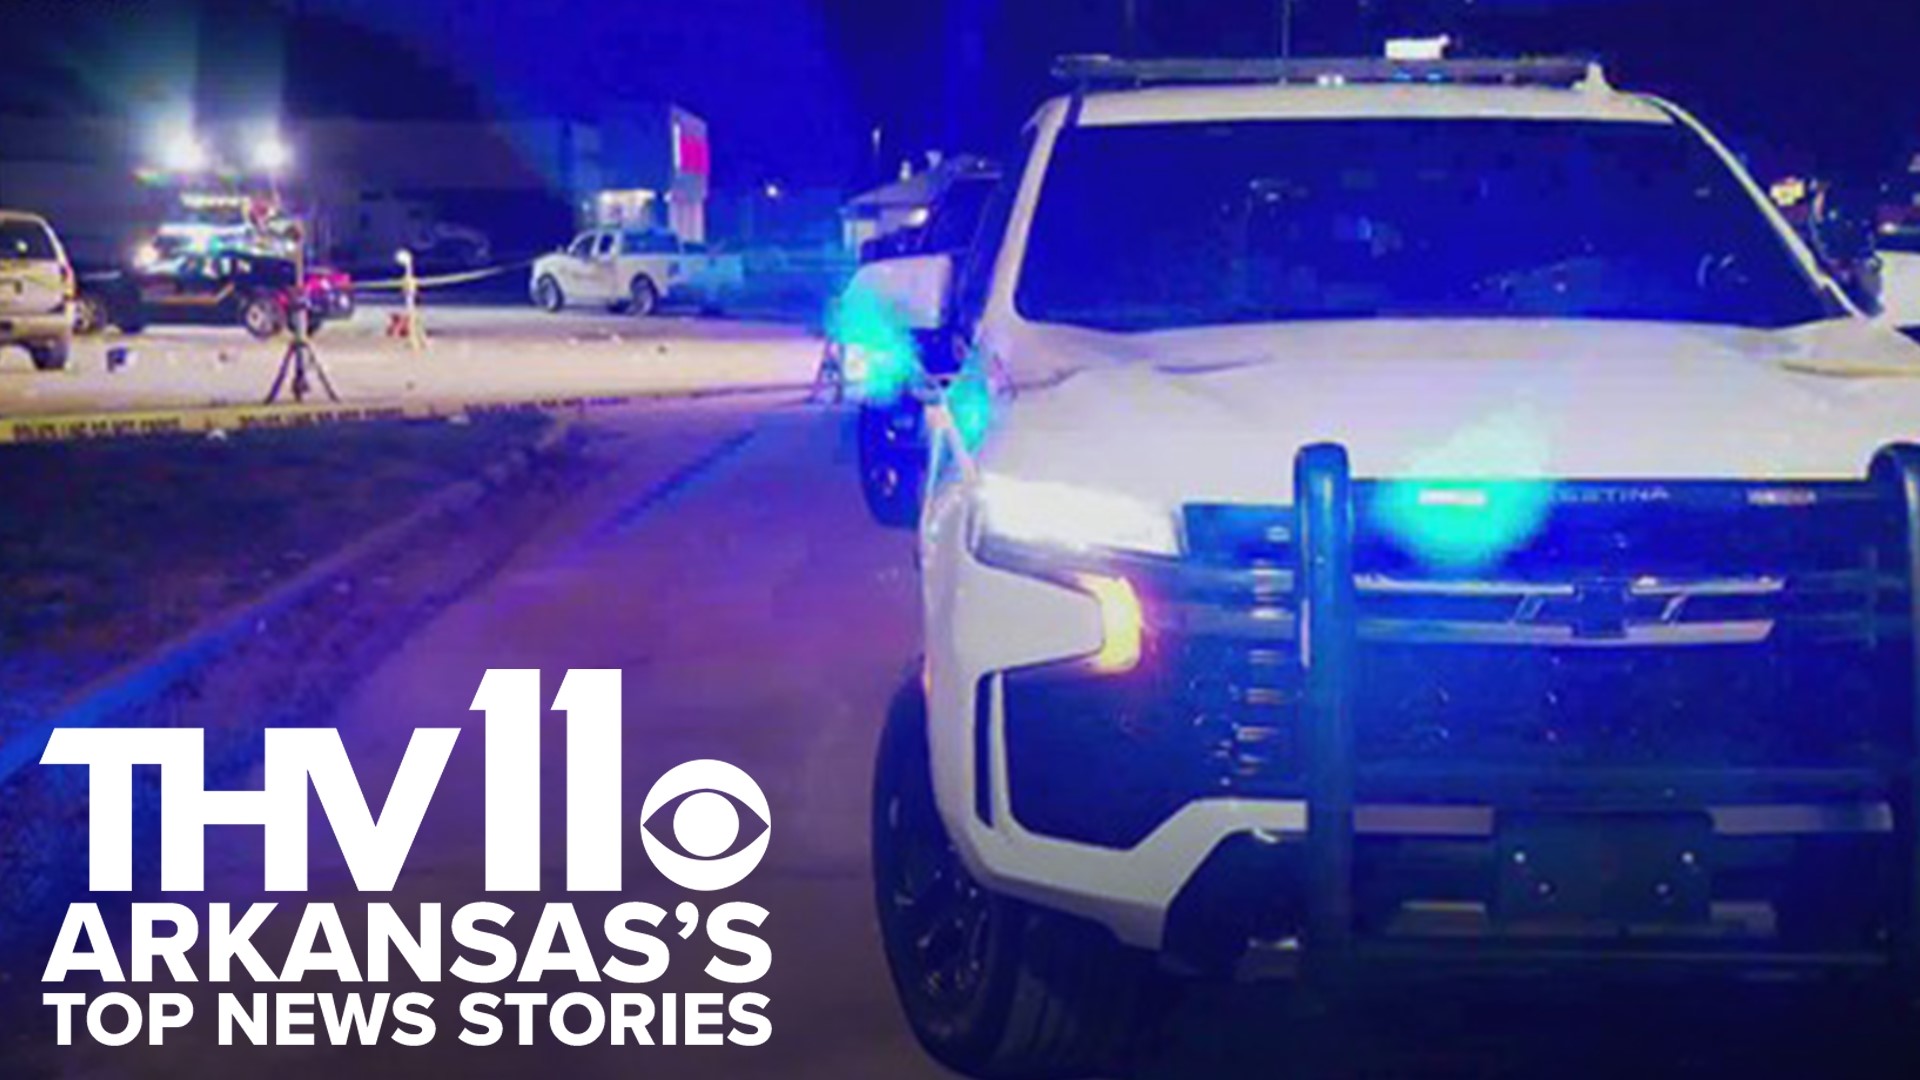 Michael Aaron shares the top news stories across Arkansas, including continued coverage of what officials are calling a 'gun fight' in Dumas.